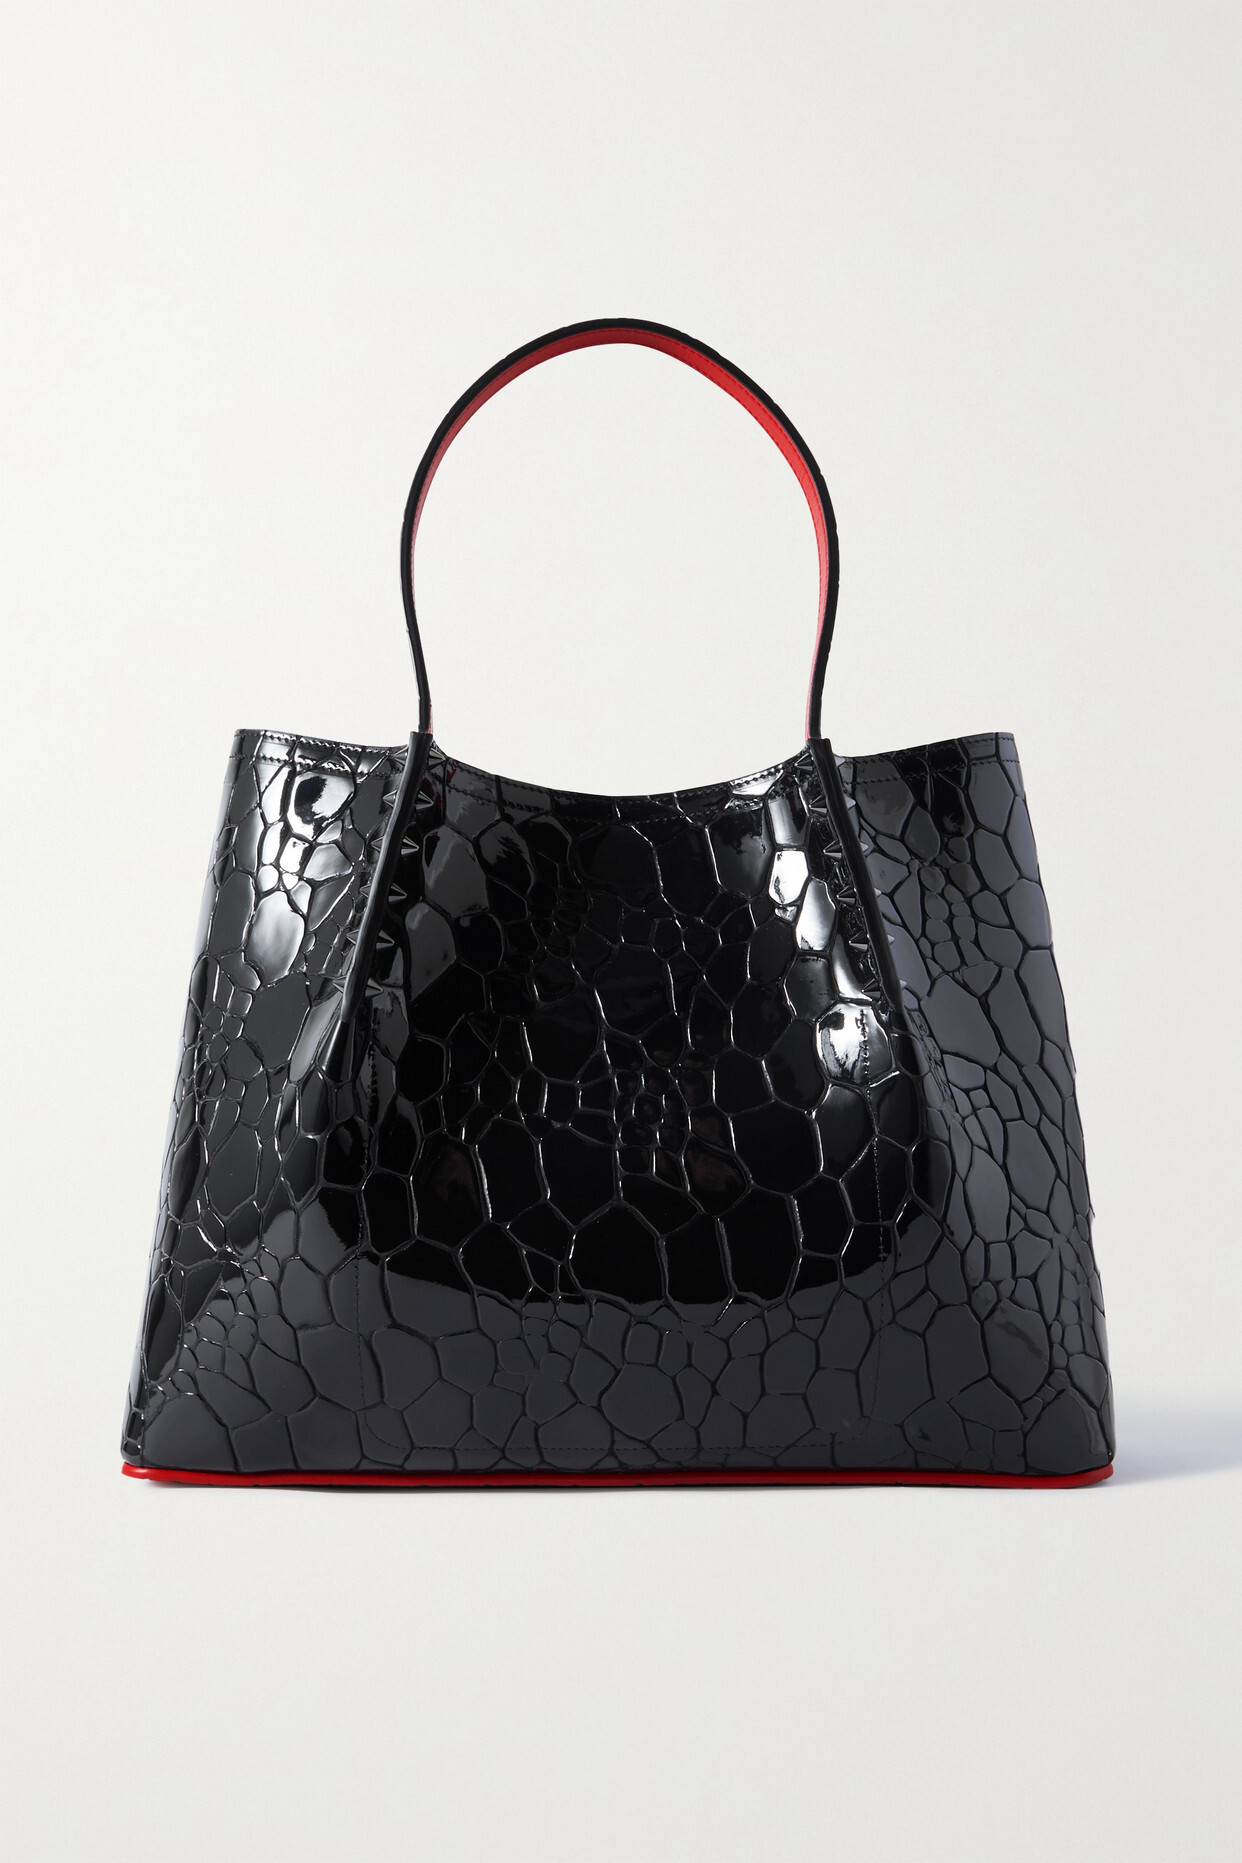 Christian Louboutin - Cabarock Small Embellished Croc-effect Patent-leather Tote - Black